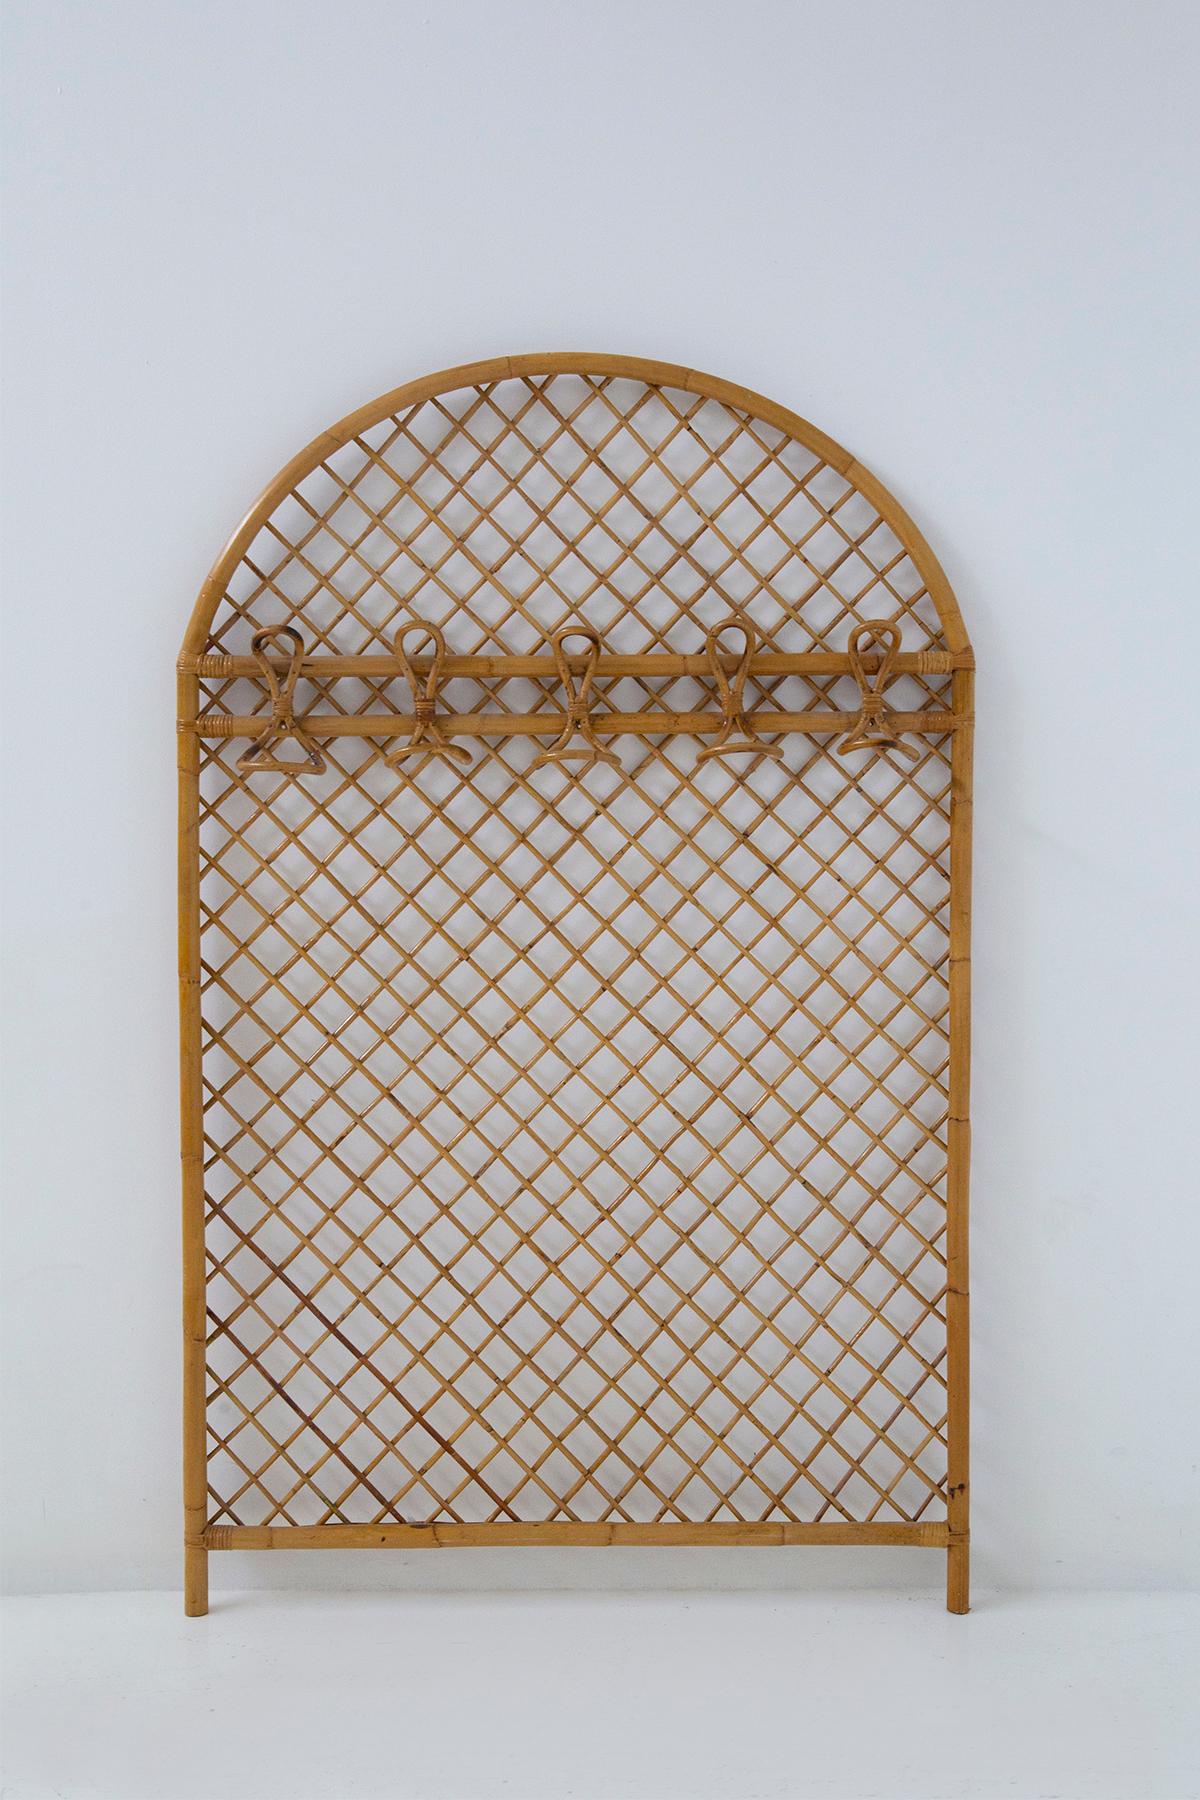 Step back in time to the glamorous 1960s, and immerse yourself in the sheer elegance of Italian design with this exquisite vintage wall hanging. Crafted with meticulous attention to detail, it embodies the timeless allure of an era when style and